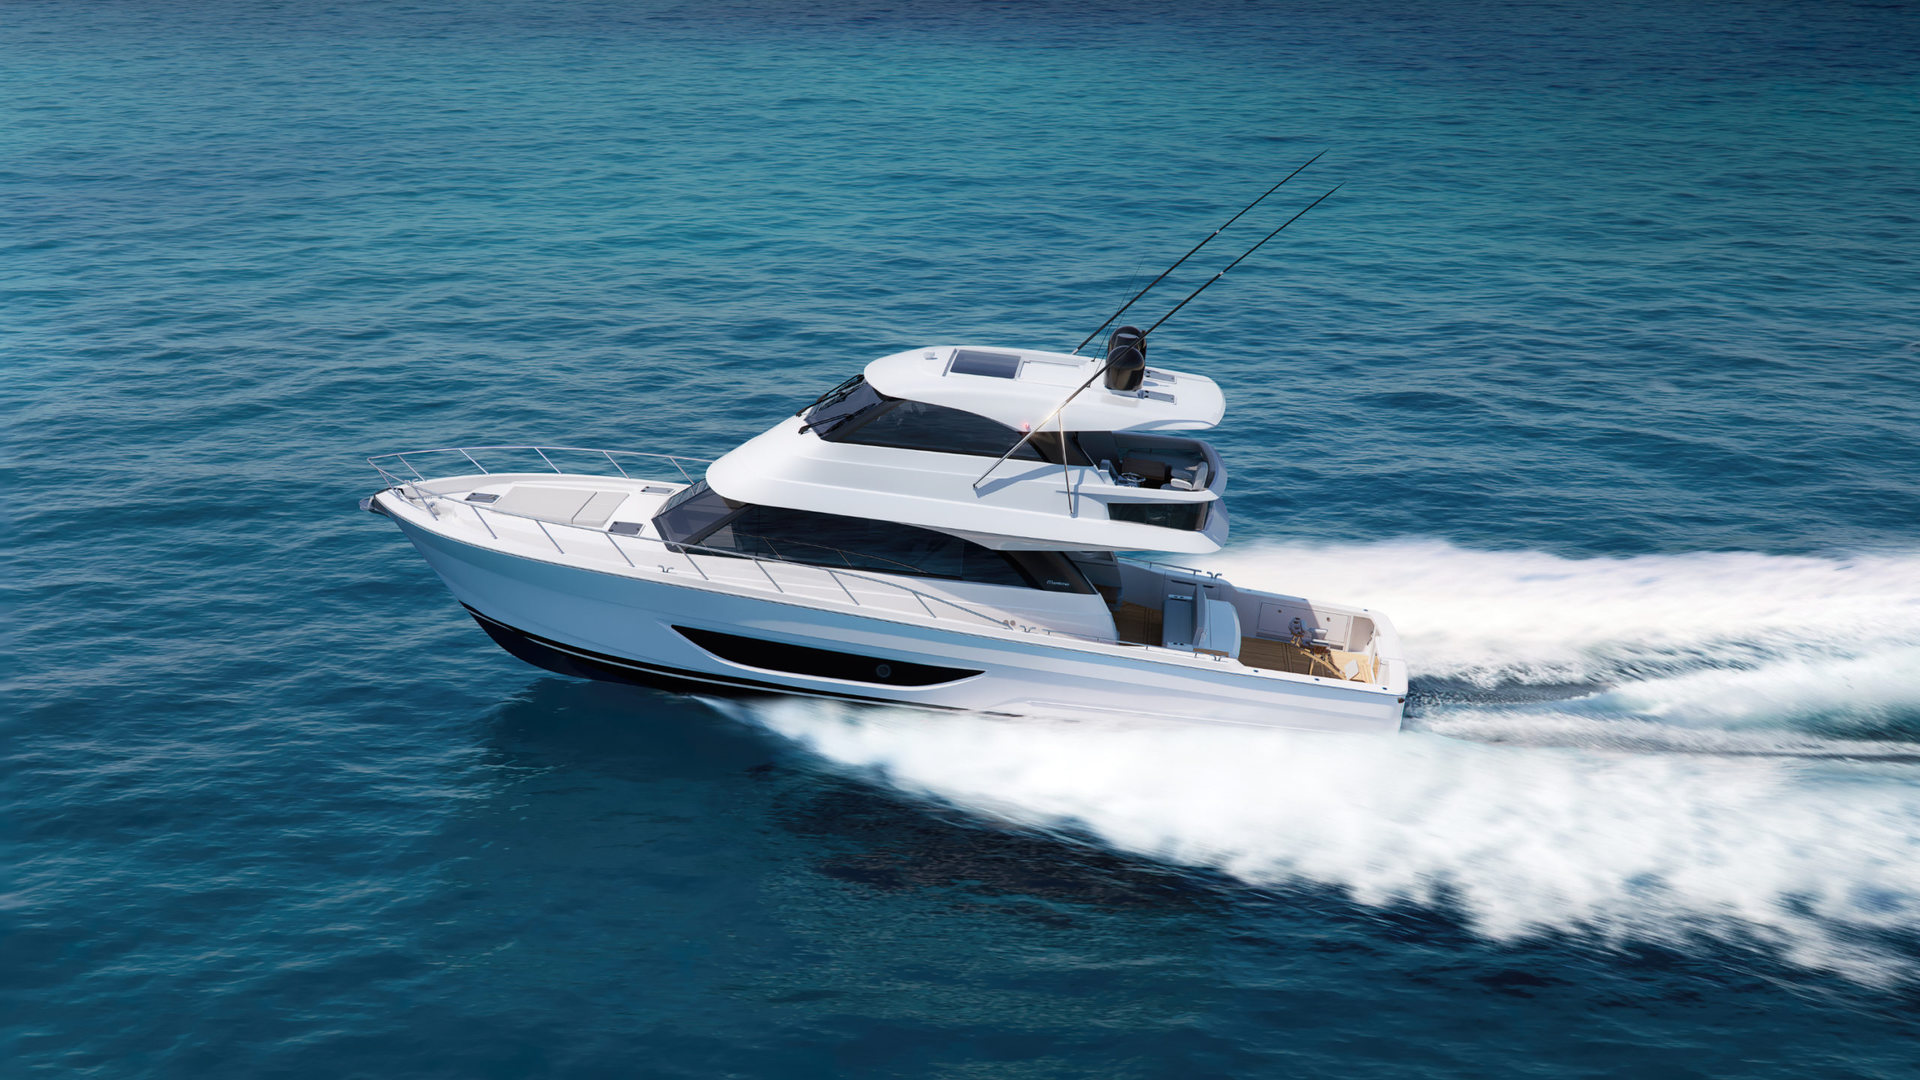 360 VR Virtual Tours of the Maritimo M600